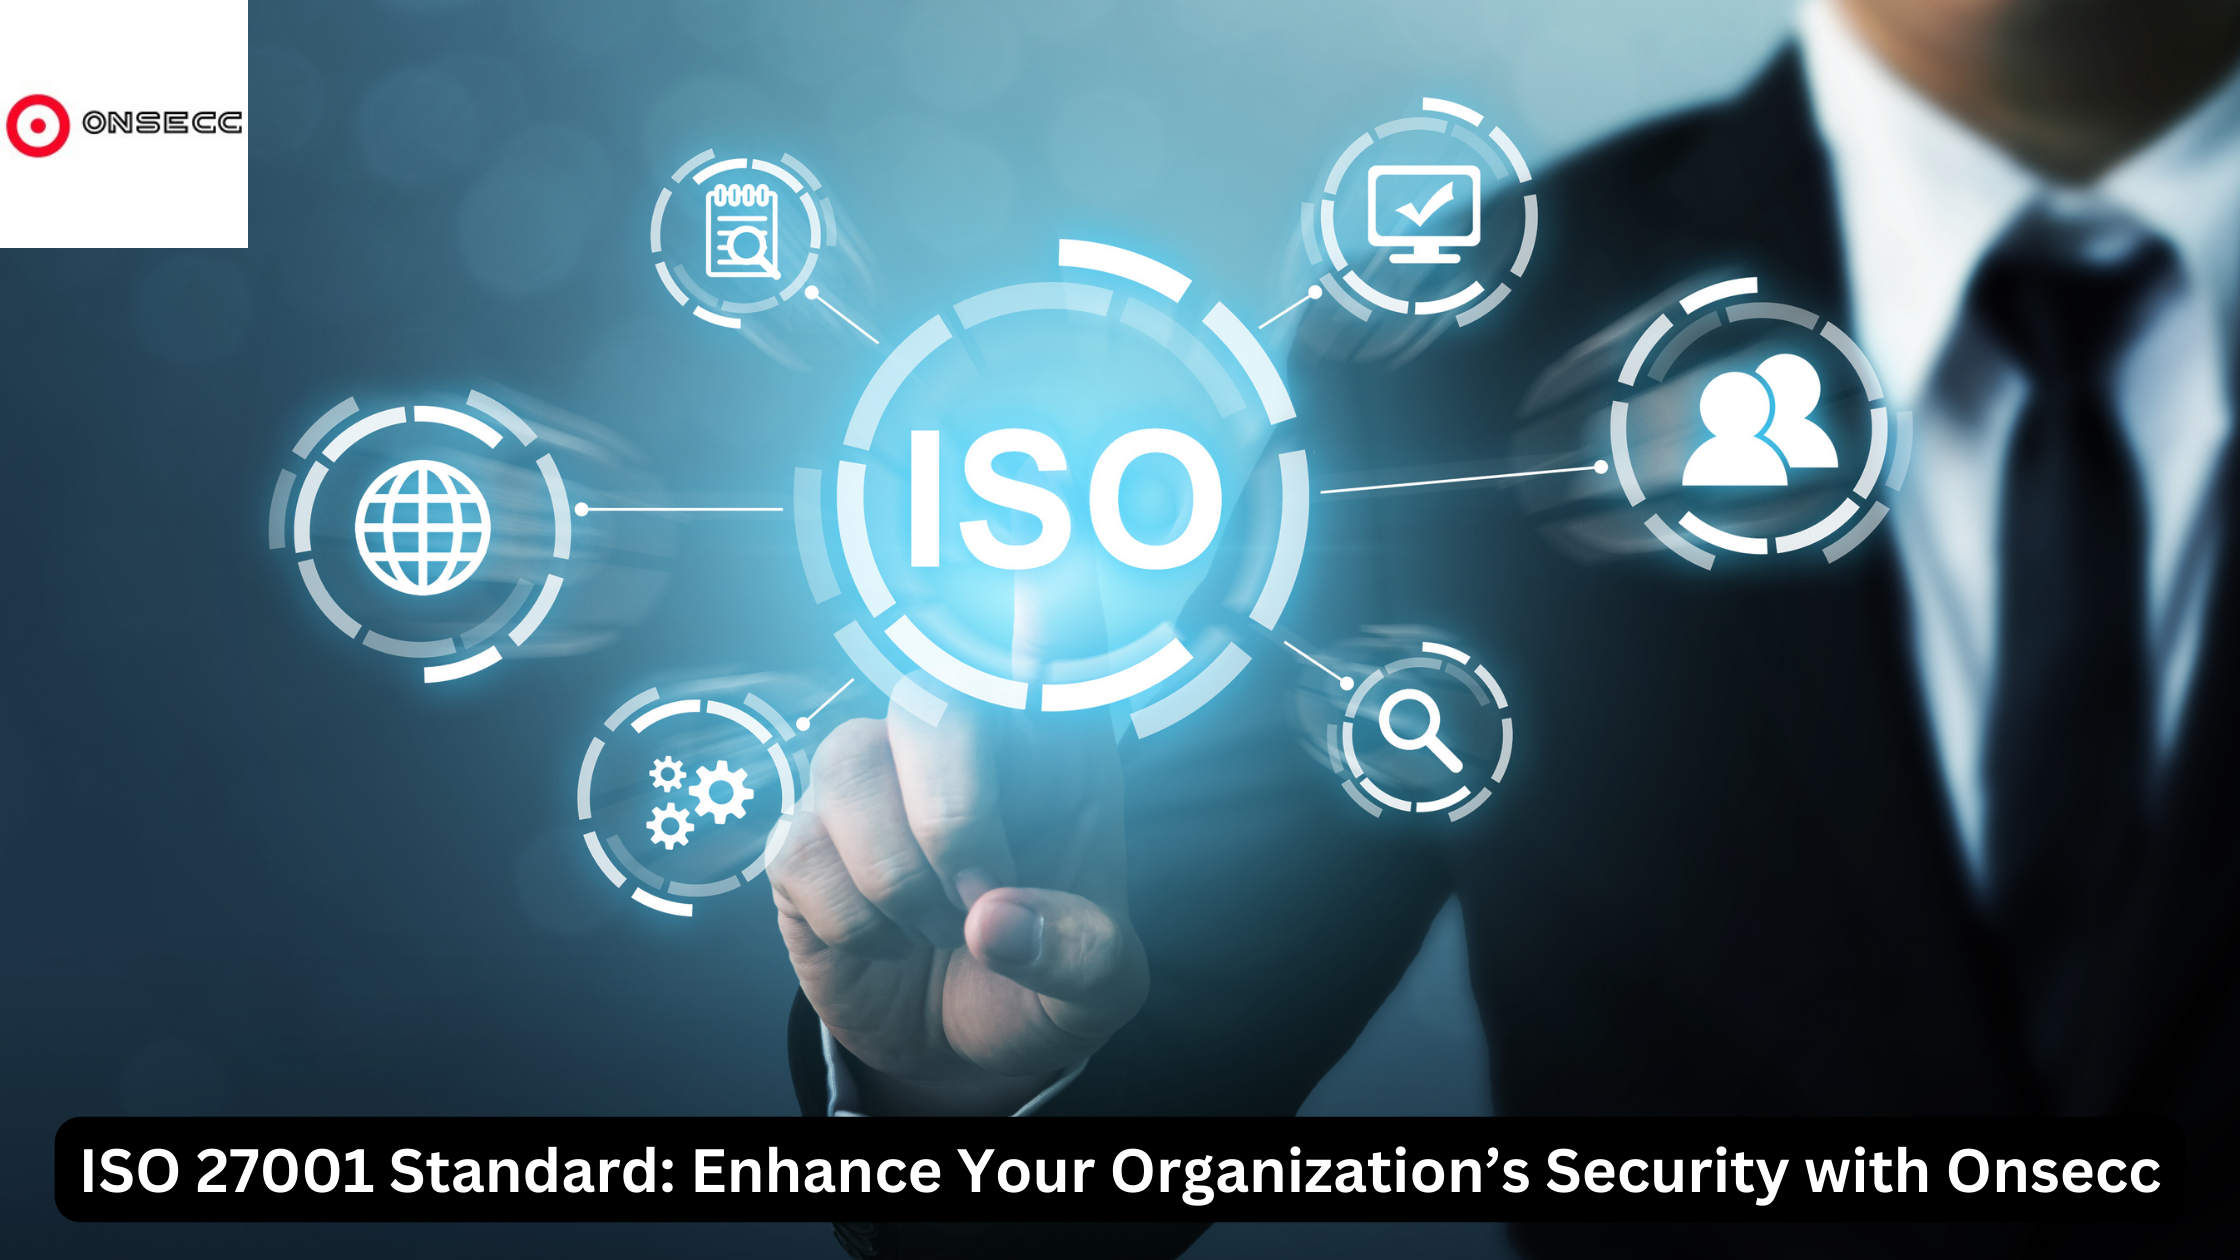 ISO 27001 Standard: Enhance Your Organization’s Security with Onsecc